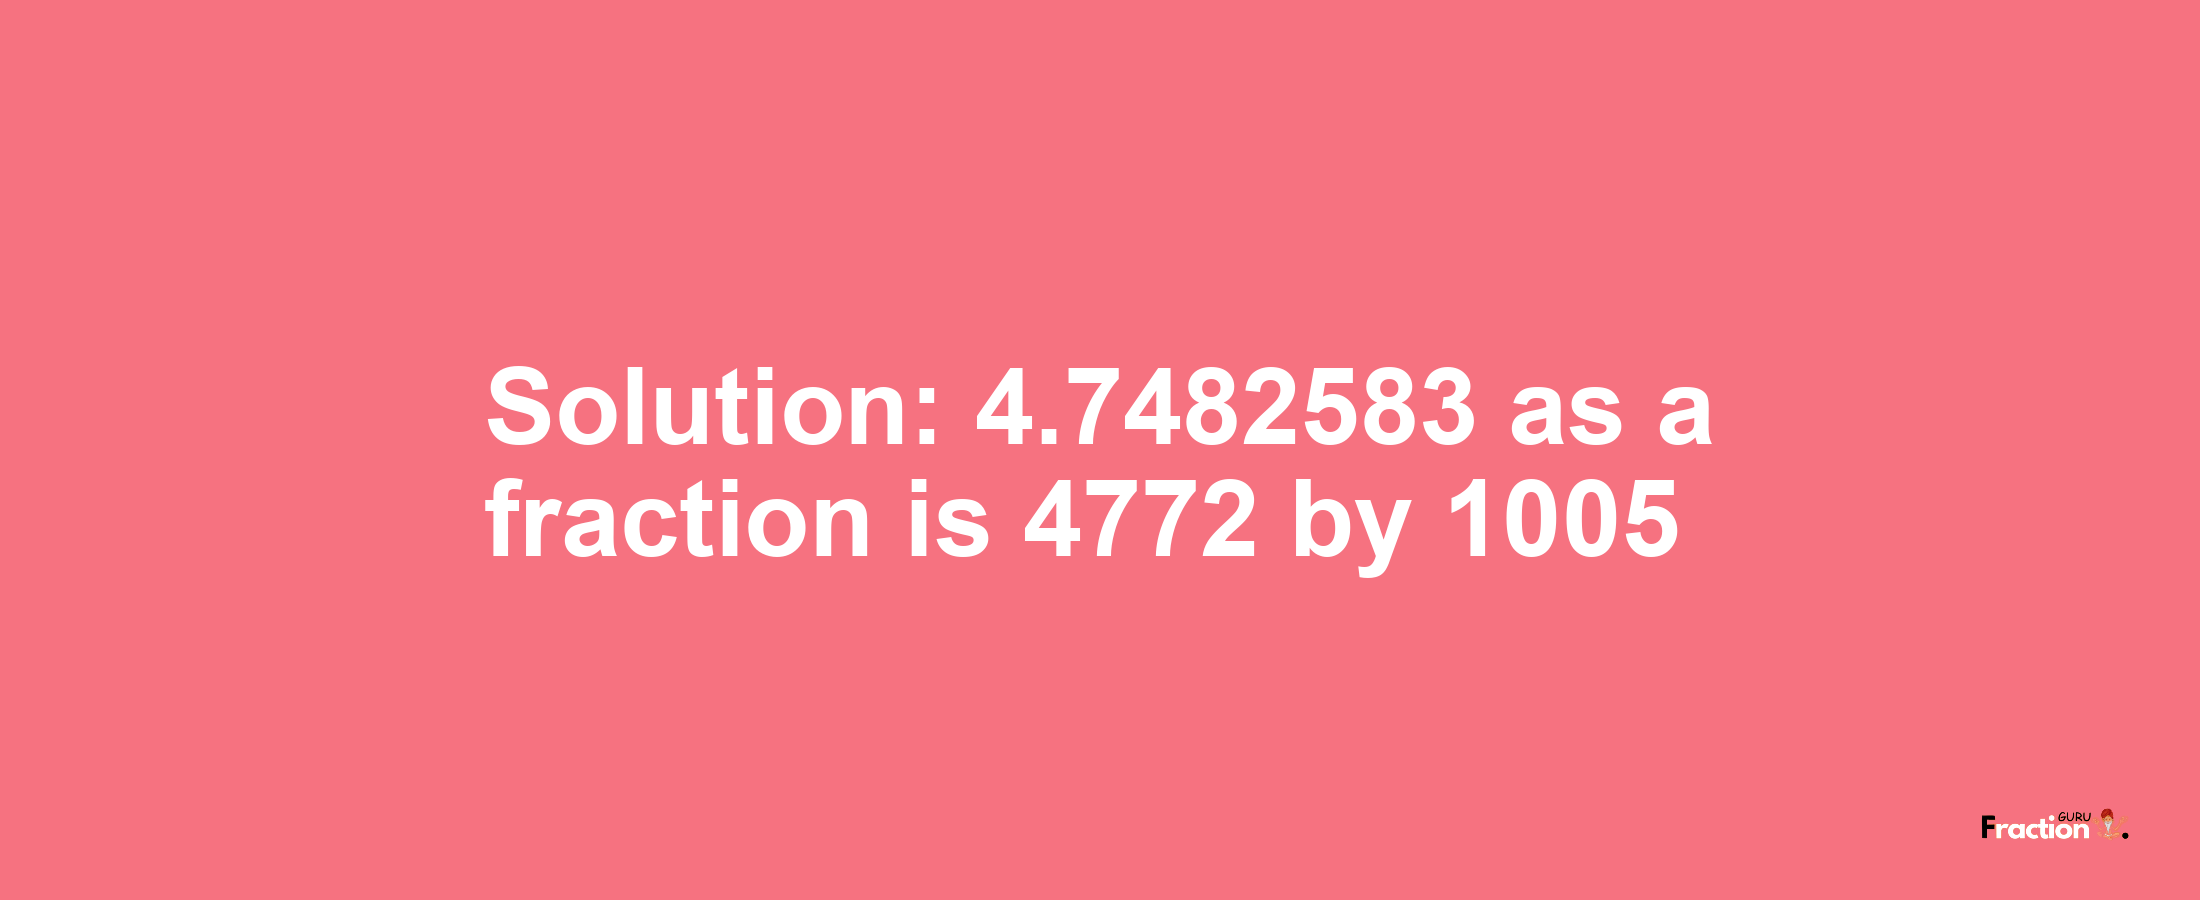 Solution:4.7482583 as a fraction is 4772/1005